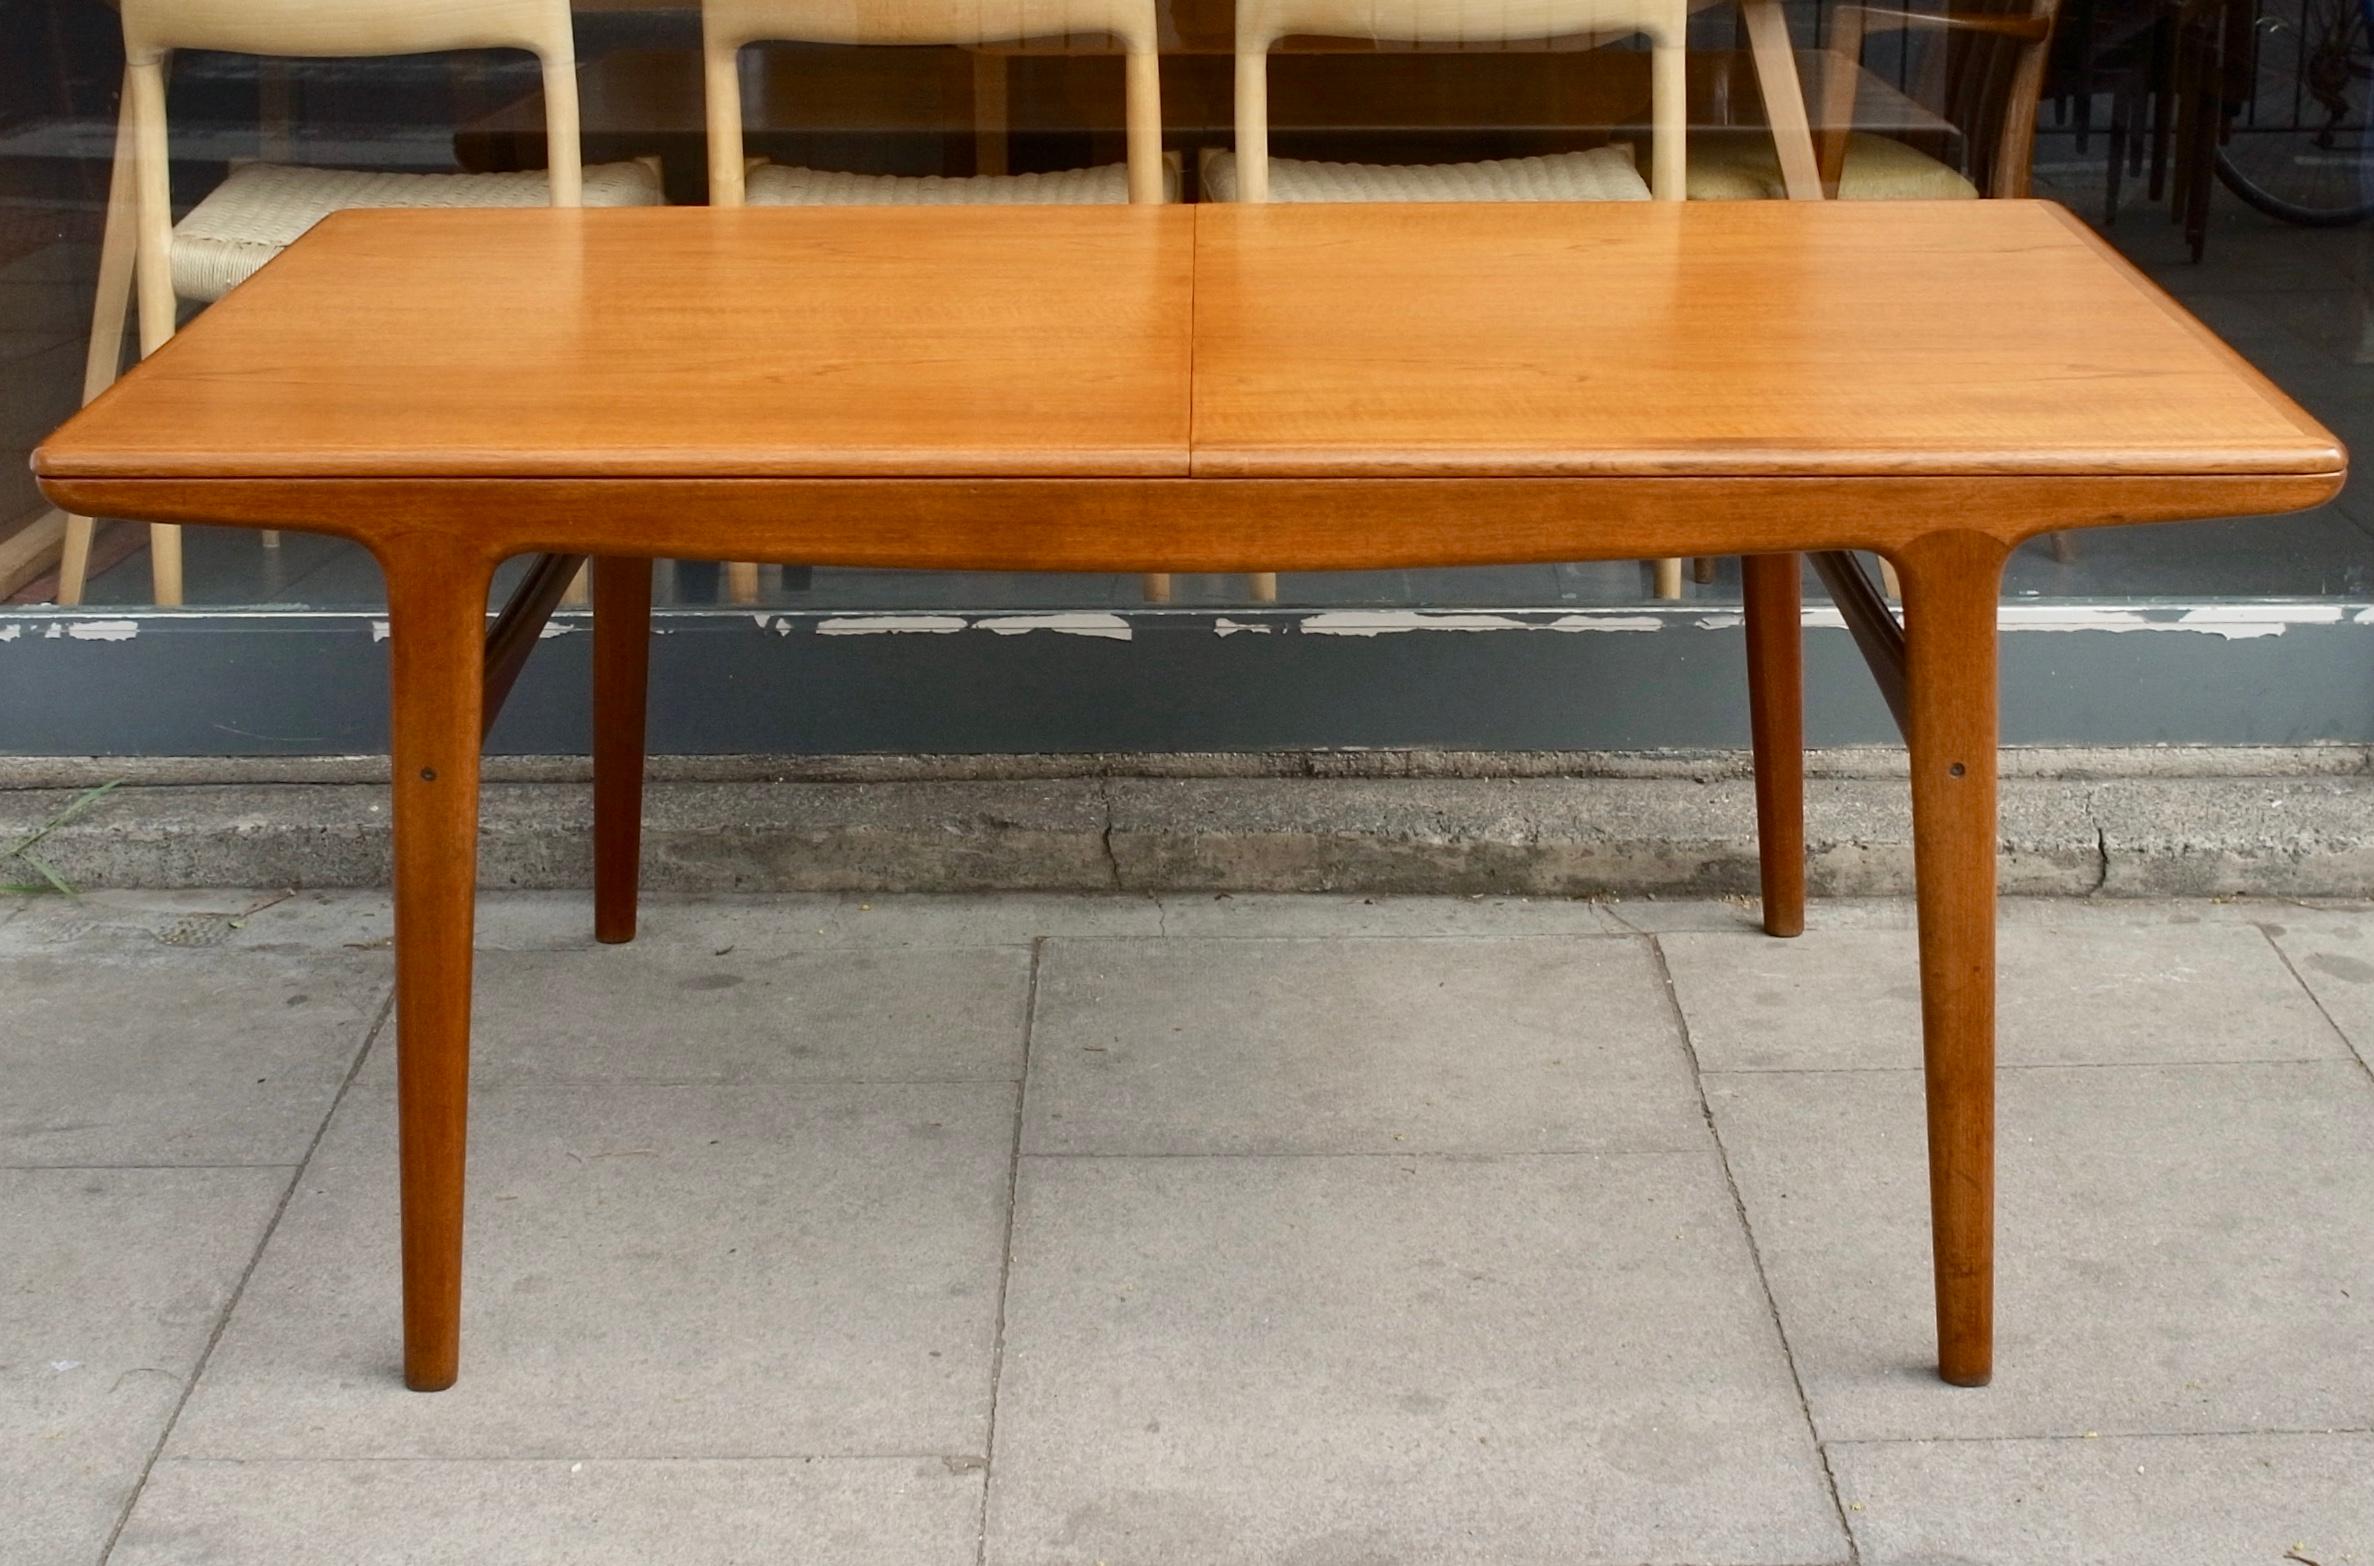 A fine sculptural 1960s teak Danish rectangular extending dining table set on four tapered legs, designed by Arne Hovmand-Olsen and produced by Mogens Kold. This table is able to seat 6x people unextended and upto 10x people when fully extended. The